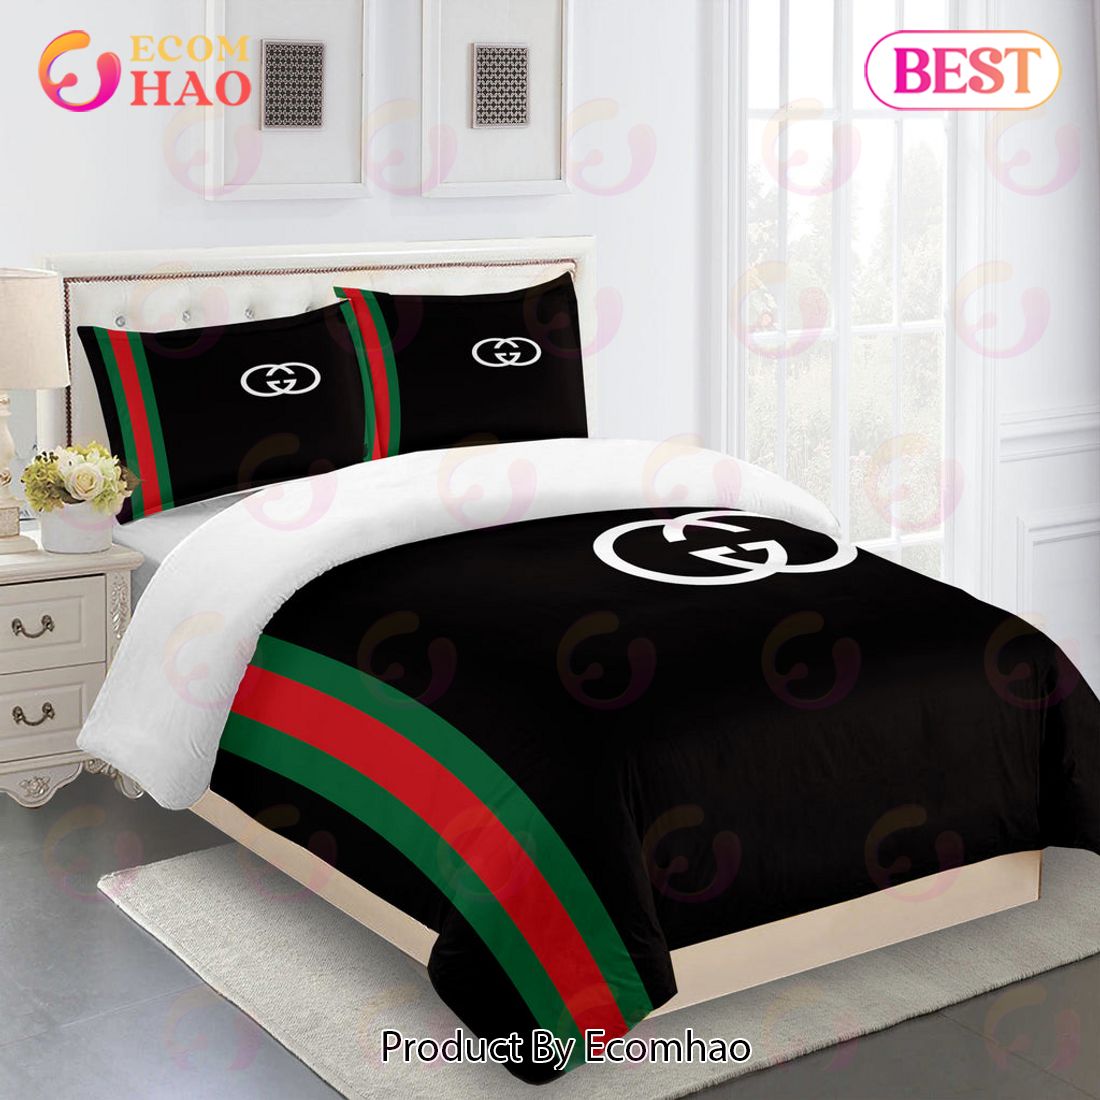 nul Gøre en indsats Symphony Gucci Bedding Set Black Red Gree Luxury Duvet Cover Bedding Sets - Ecomhao  Store